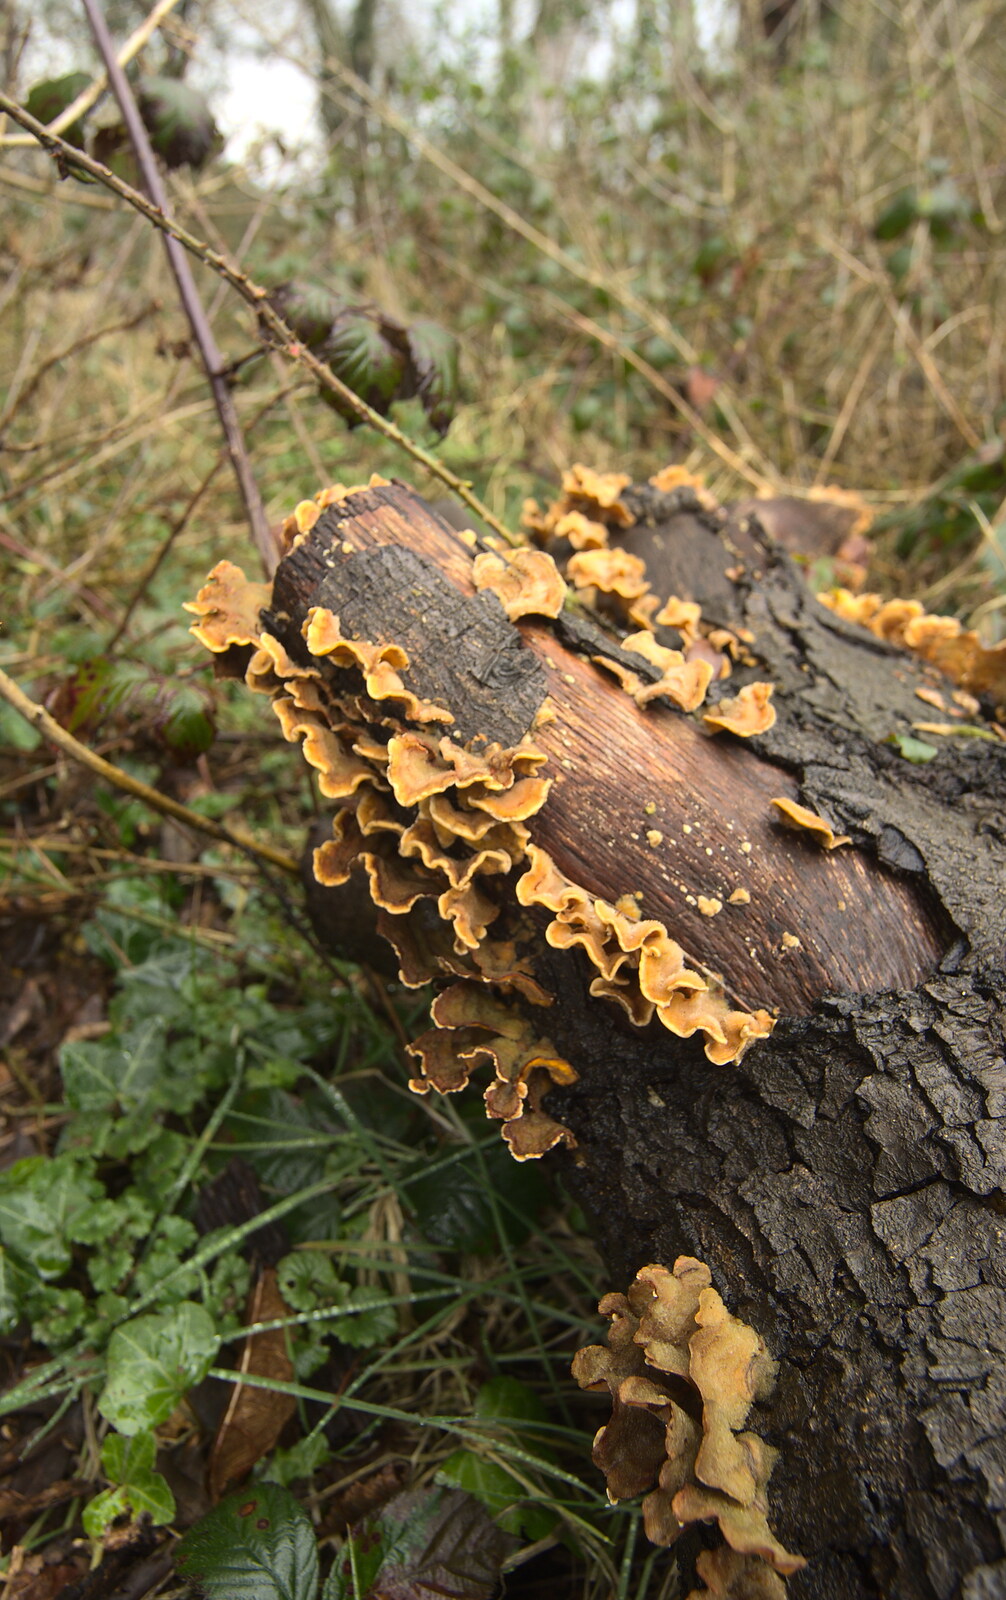 Ribbons of fungus on a tree stump from A Trip to Highcliffe Castle, Highcliffe, Dorset - 18th March 2013